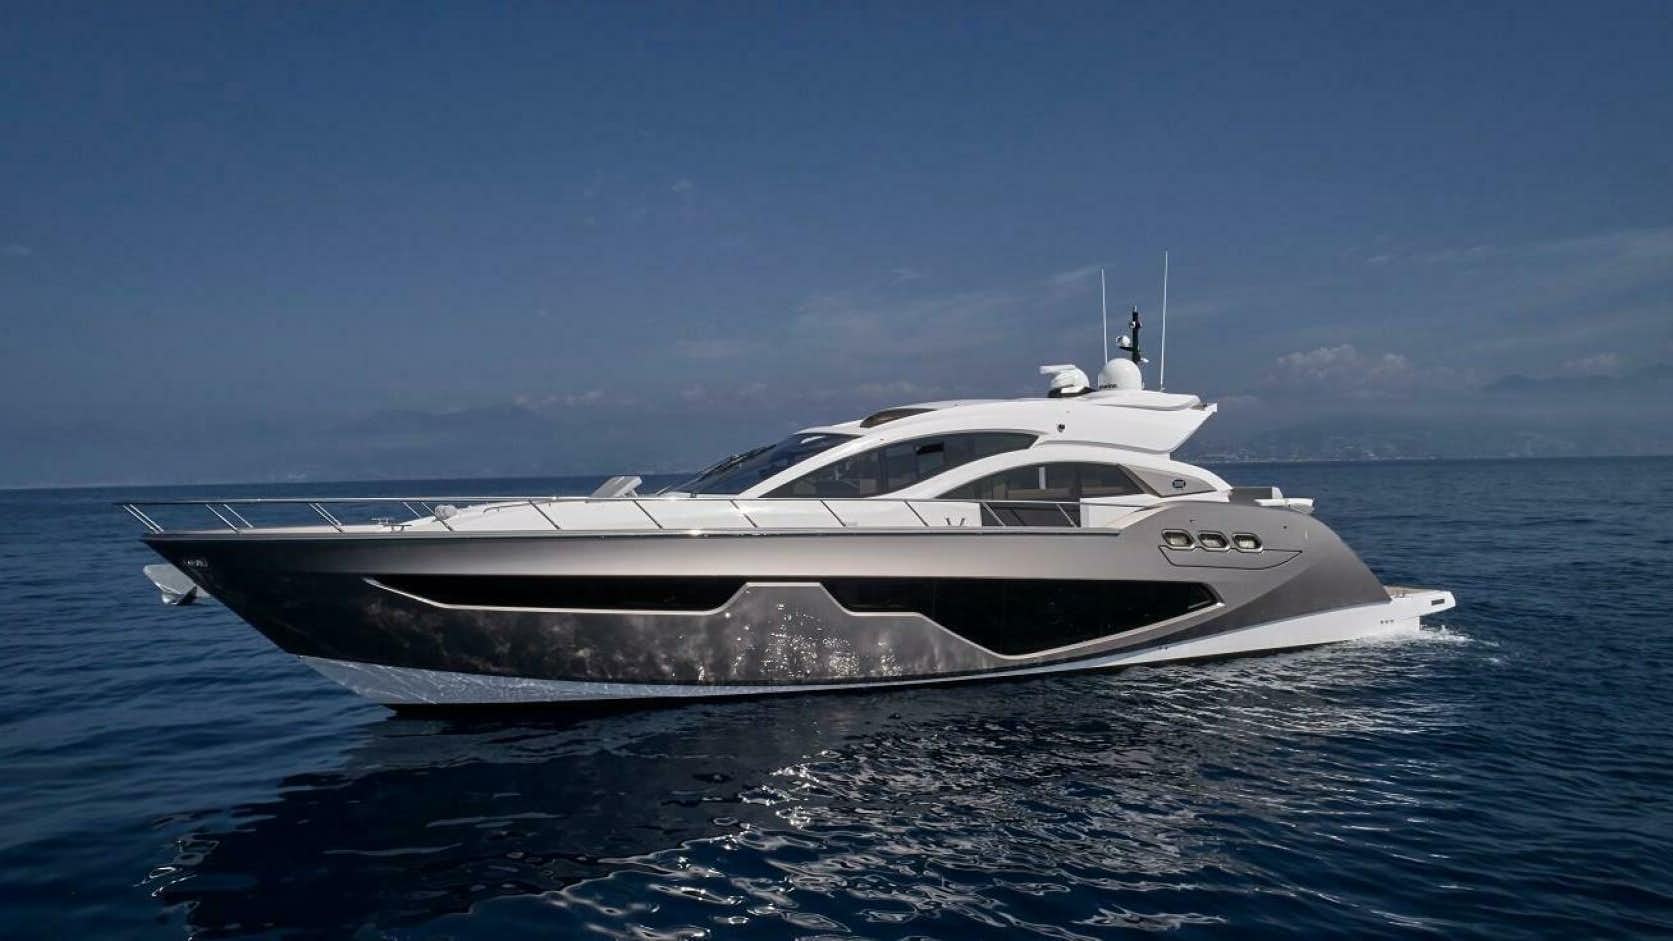 C68
Yacht for Sale